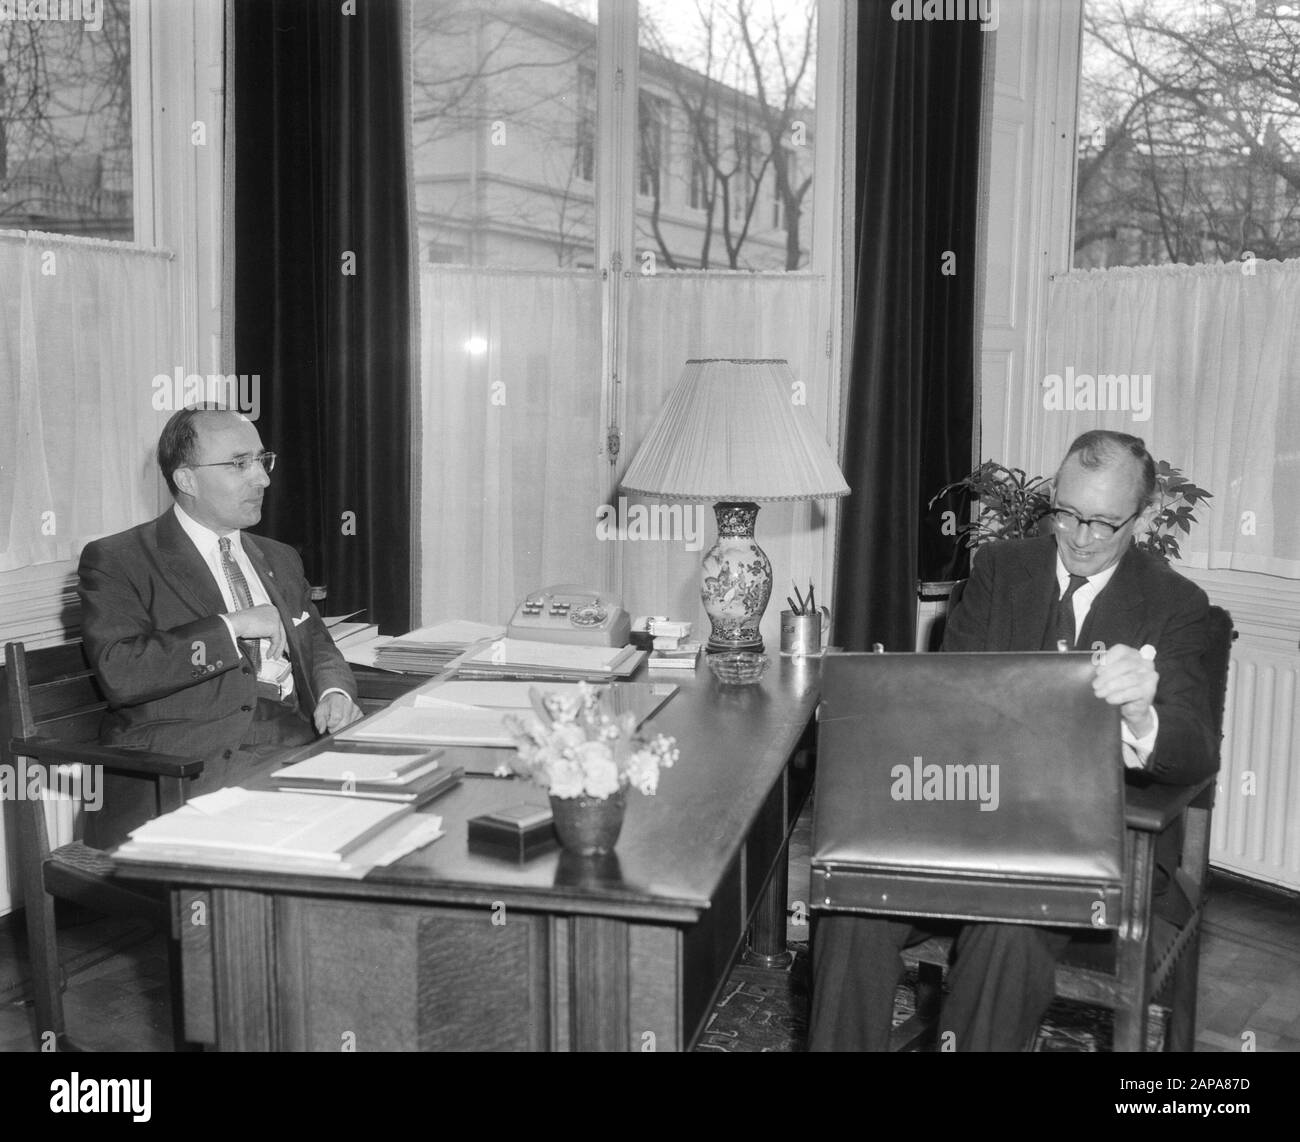 The cabinet crisis, formateur mr. Cals in conversation with minister of finance professor dr. Witteveen Date: March 17, 1965 Location: The Hague, Zuid-Holland Keywords: formateurs, conversations, cabinet formations, ministers Stock Photo